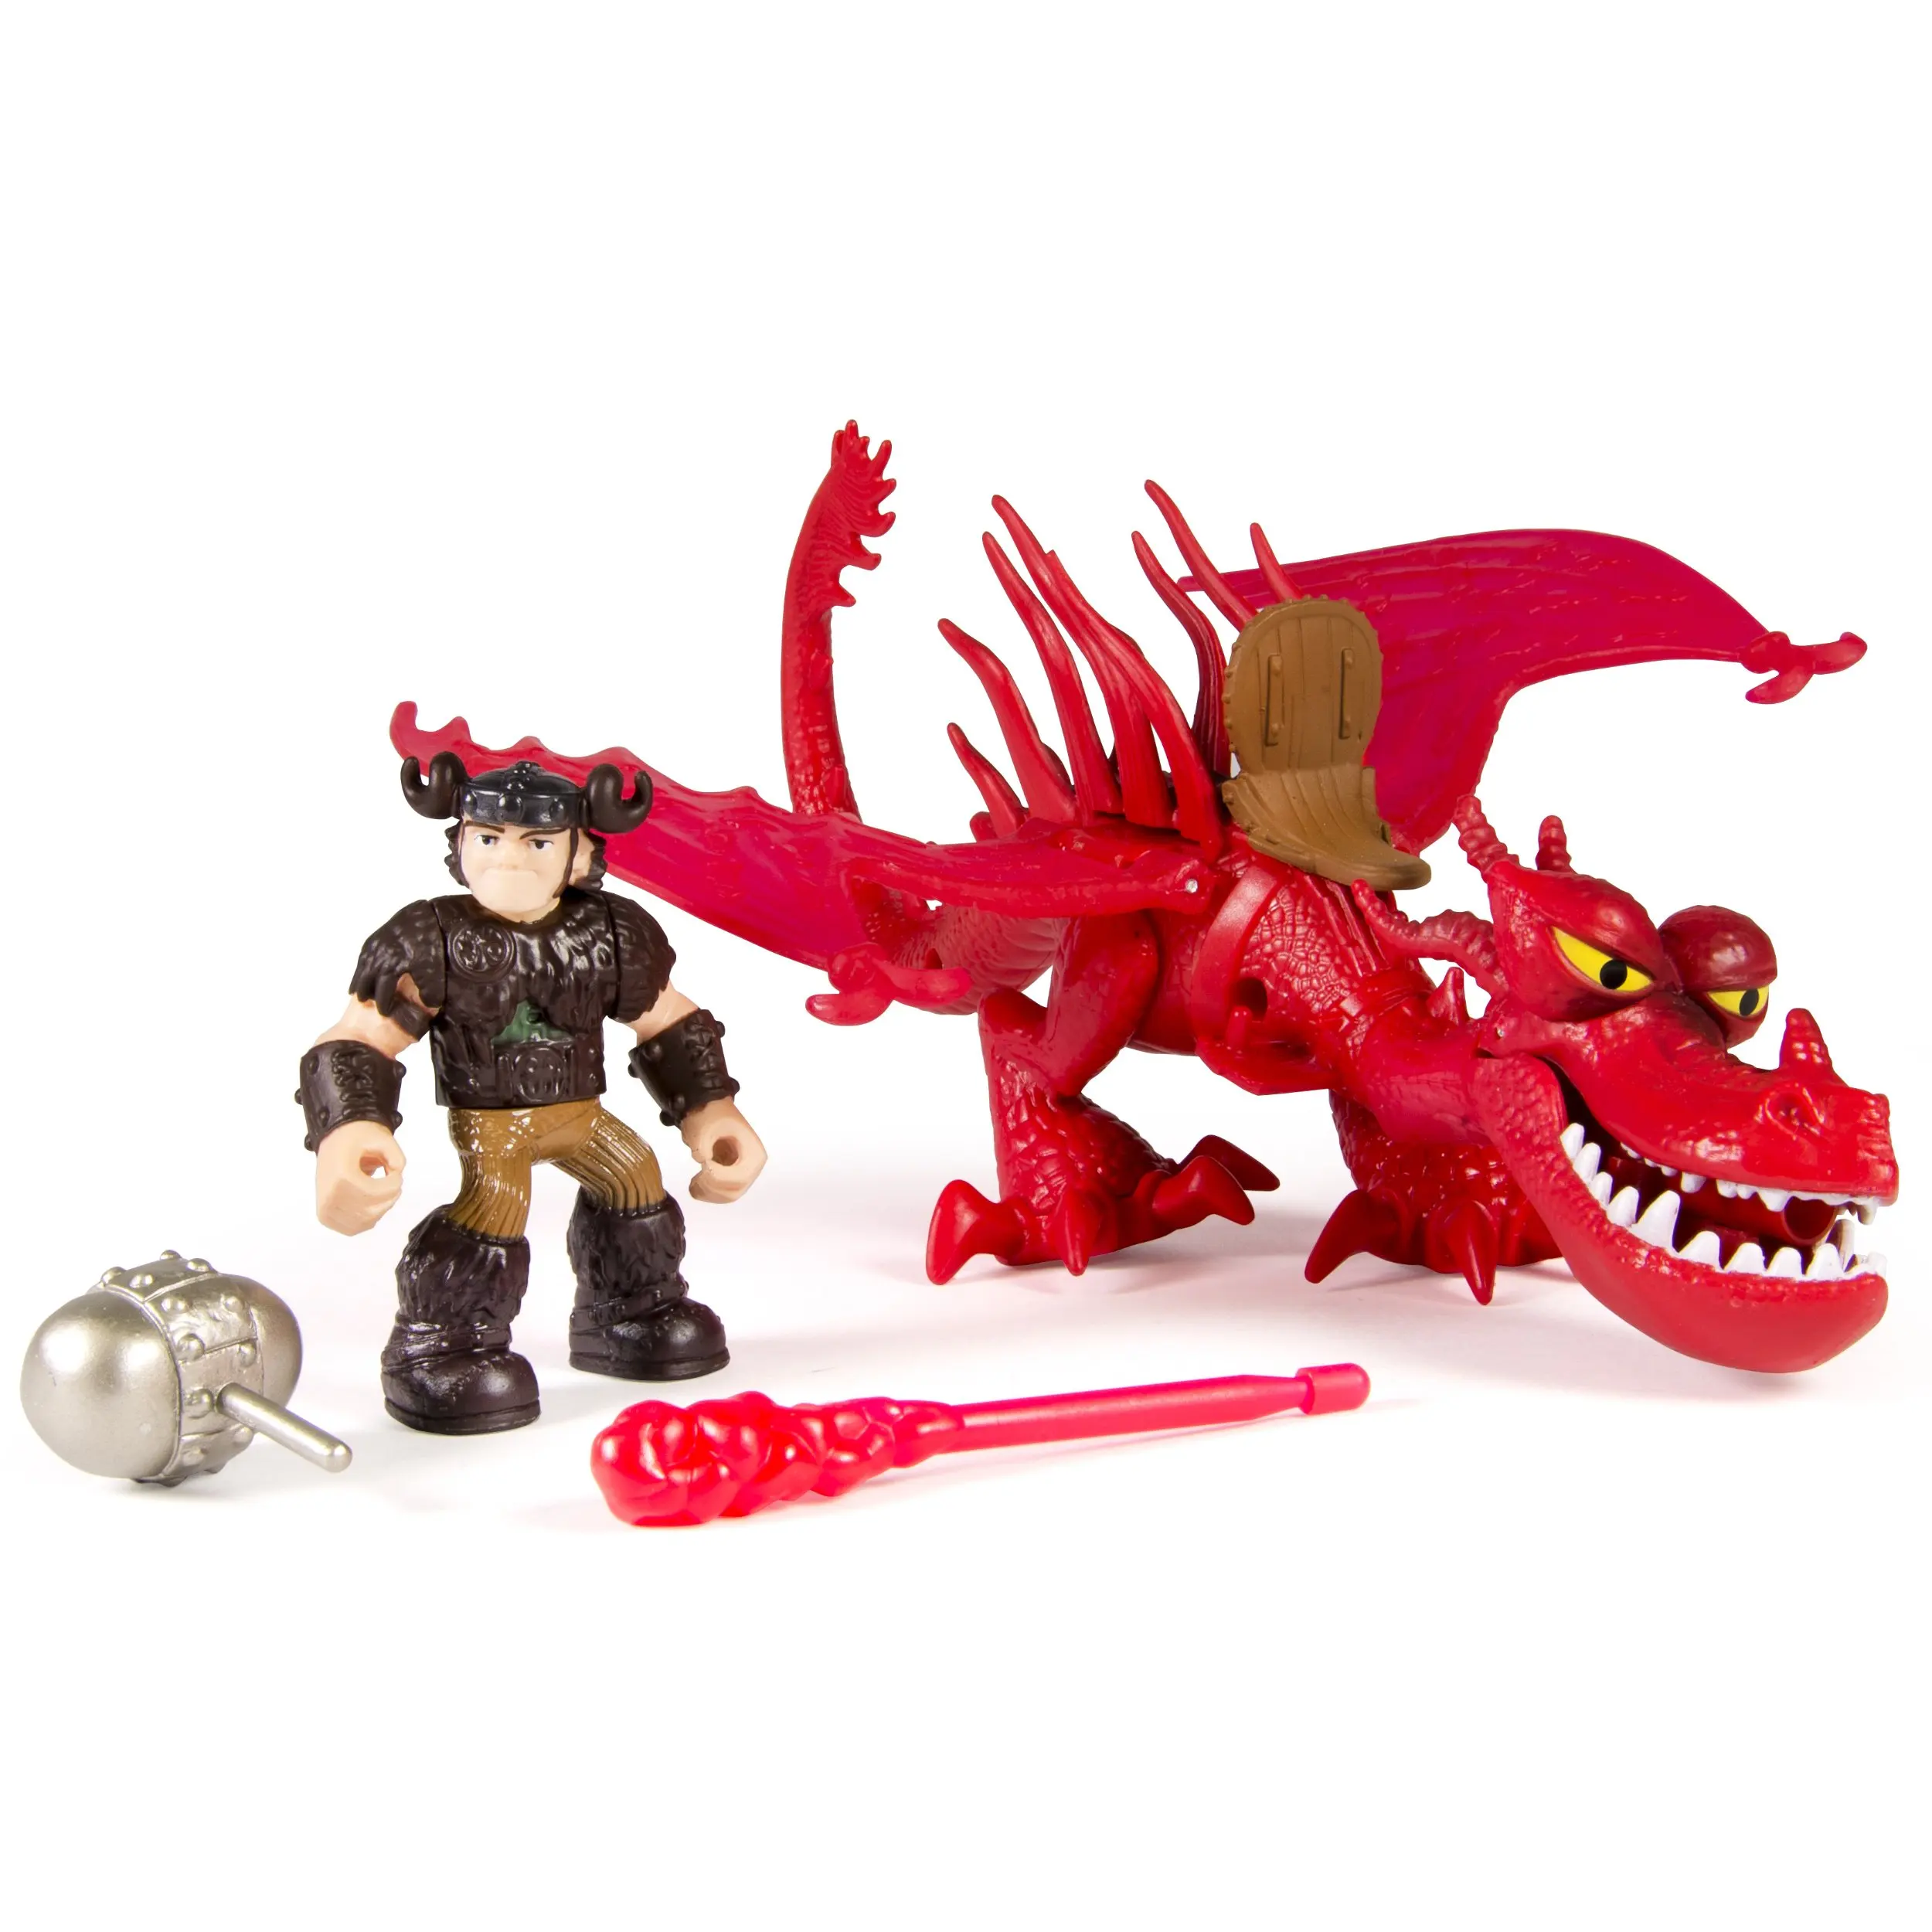 Buy Dreamworks Dragons Dragon Riders Hiccup And Toothless Figures In